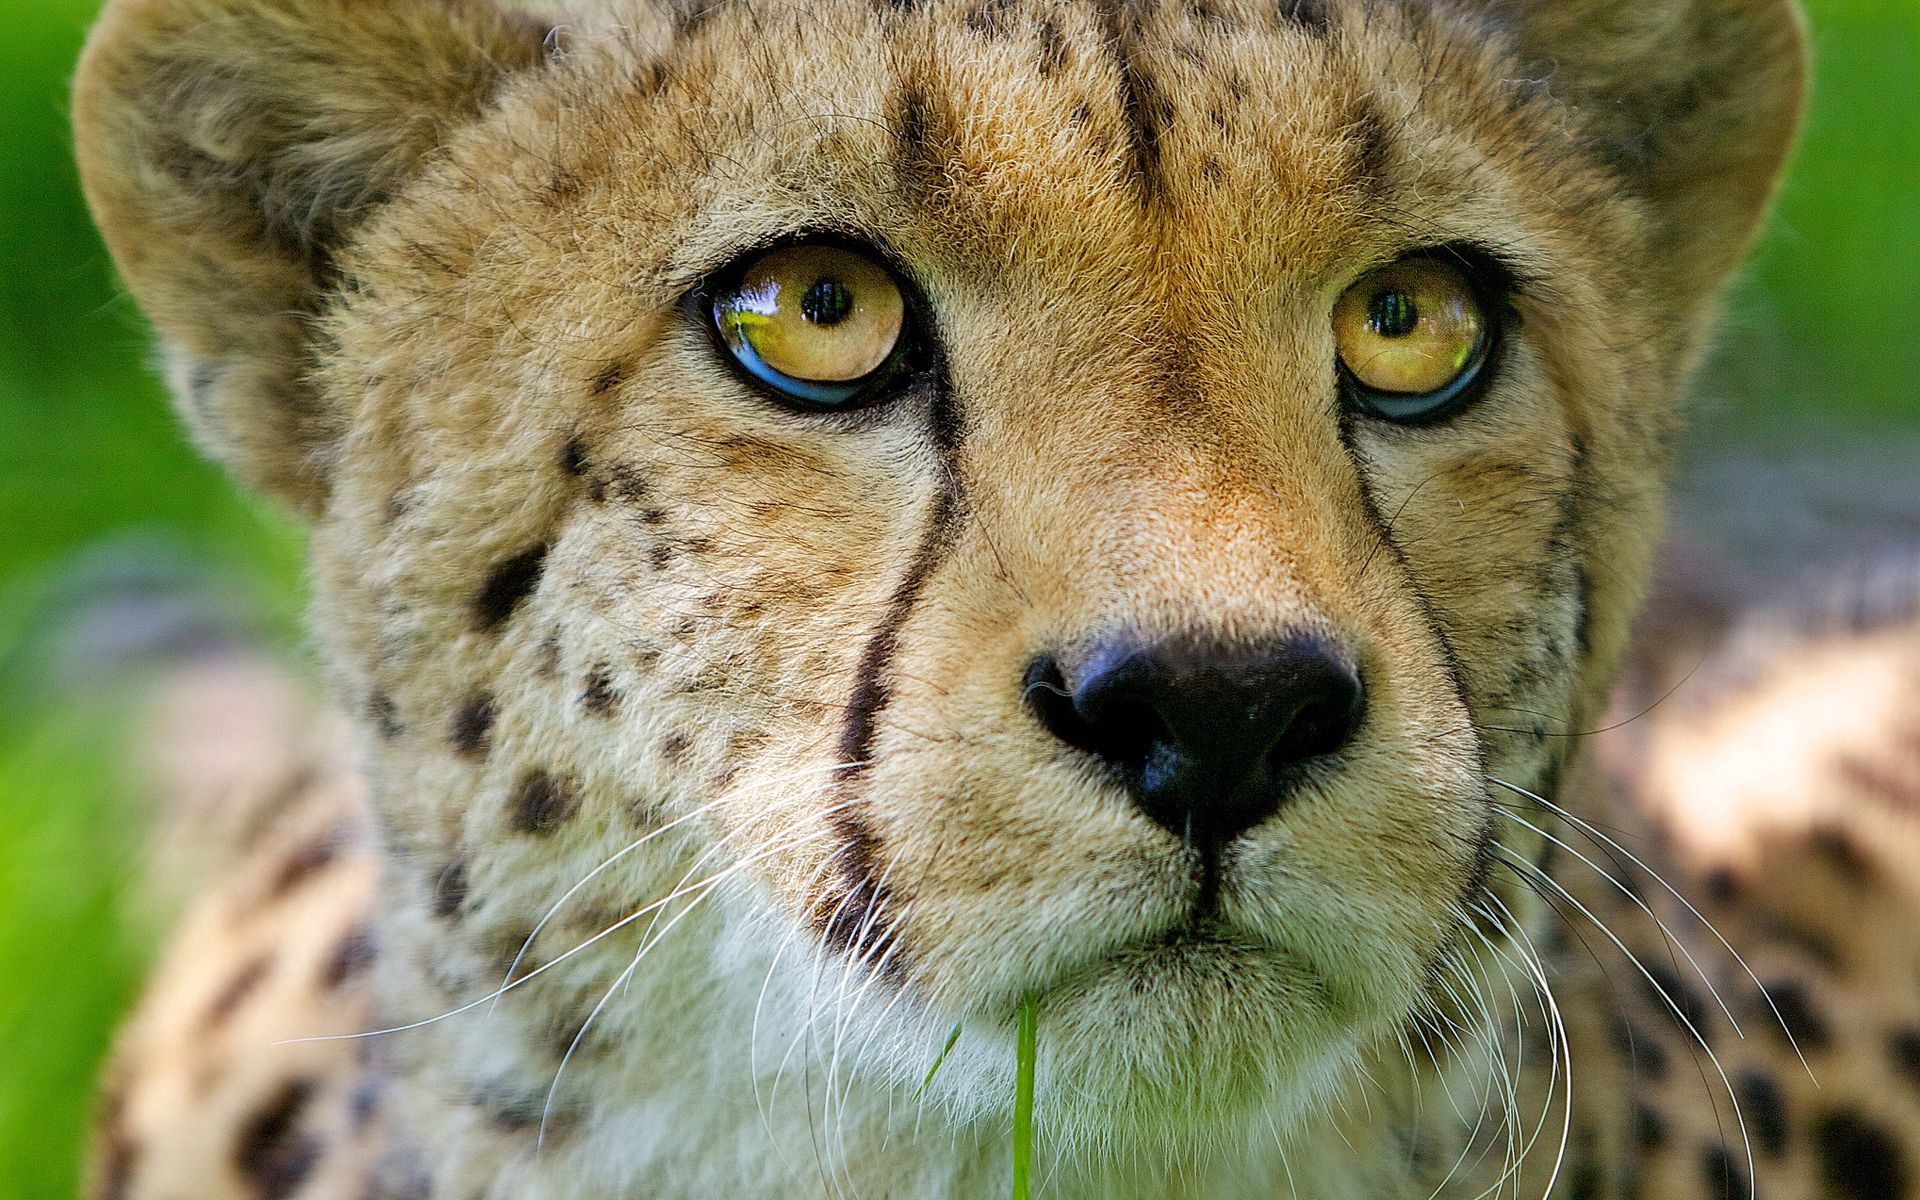 Cool Wallpapers cheetah, animals, young, muzzle, close up, joey, nose